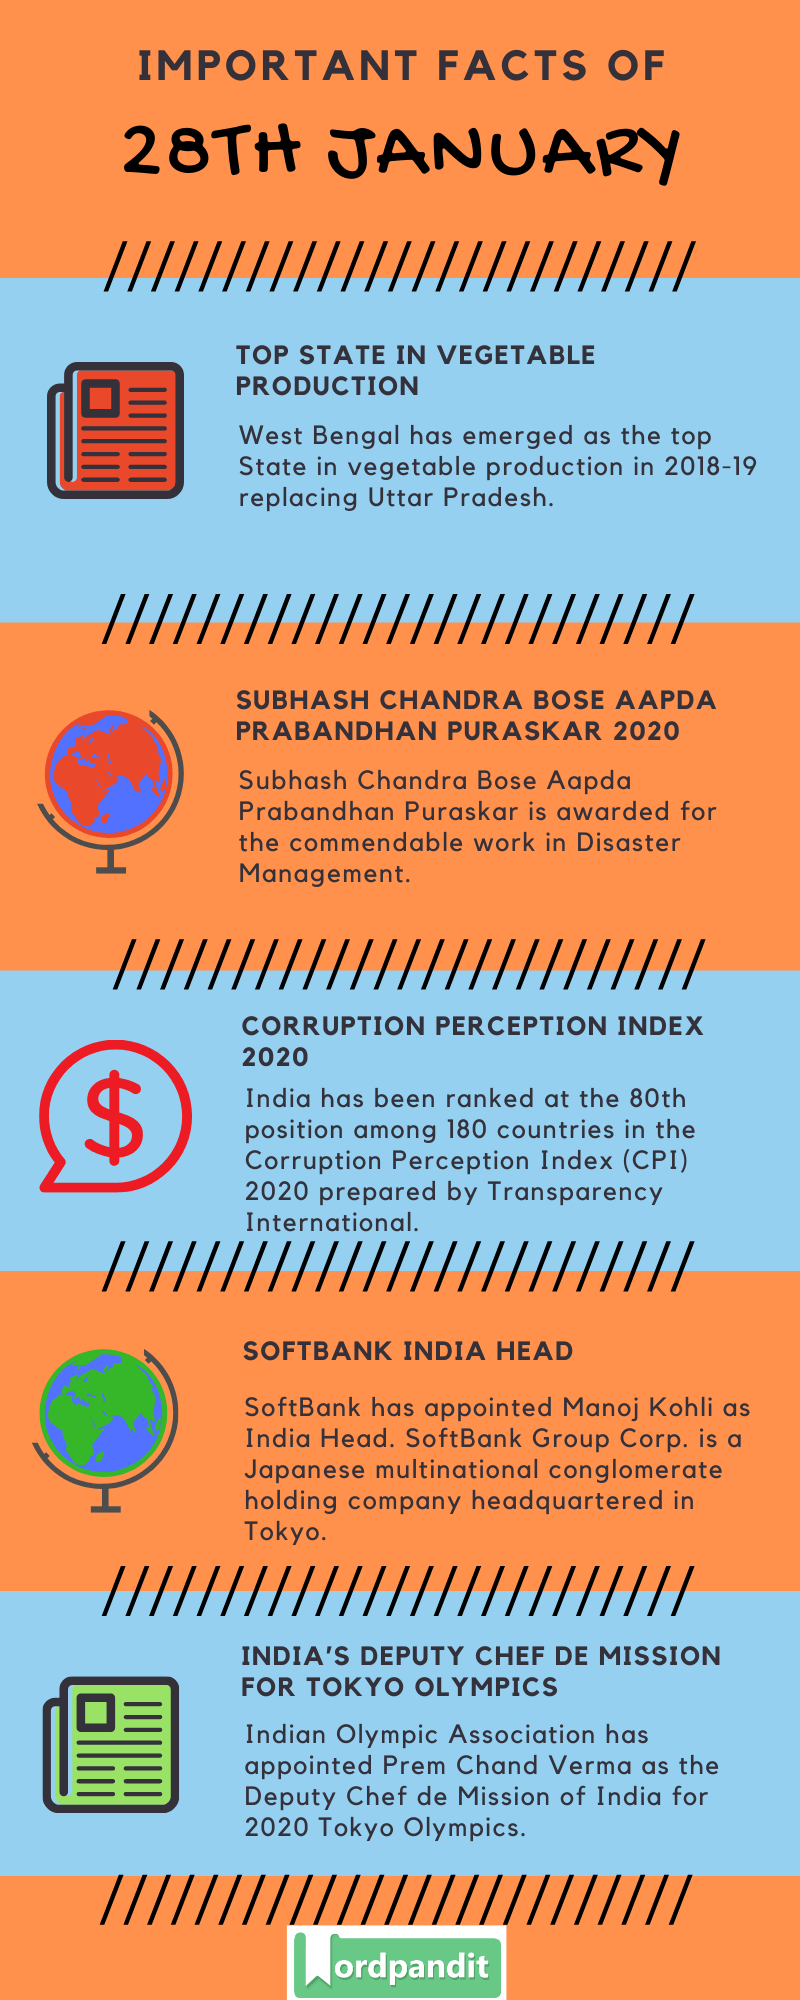 Daily Current Affairs 28 January 2020 Current Affairs Quiz 28 January 2020 Current Affairs Infographic